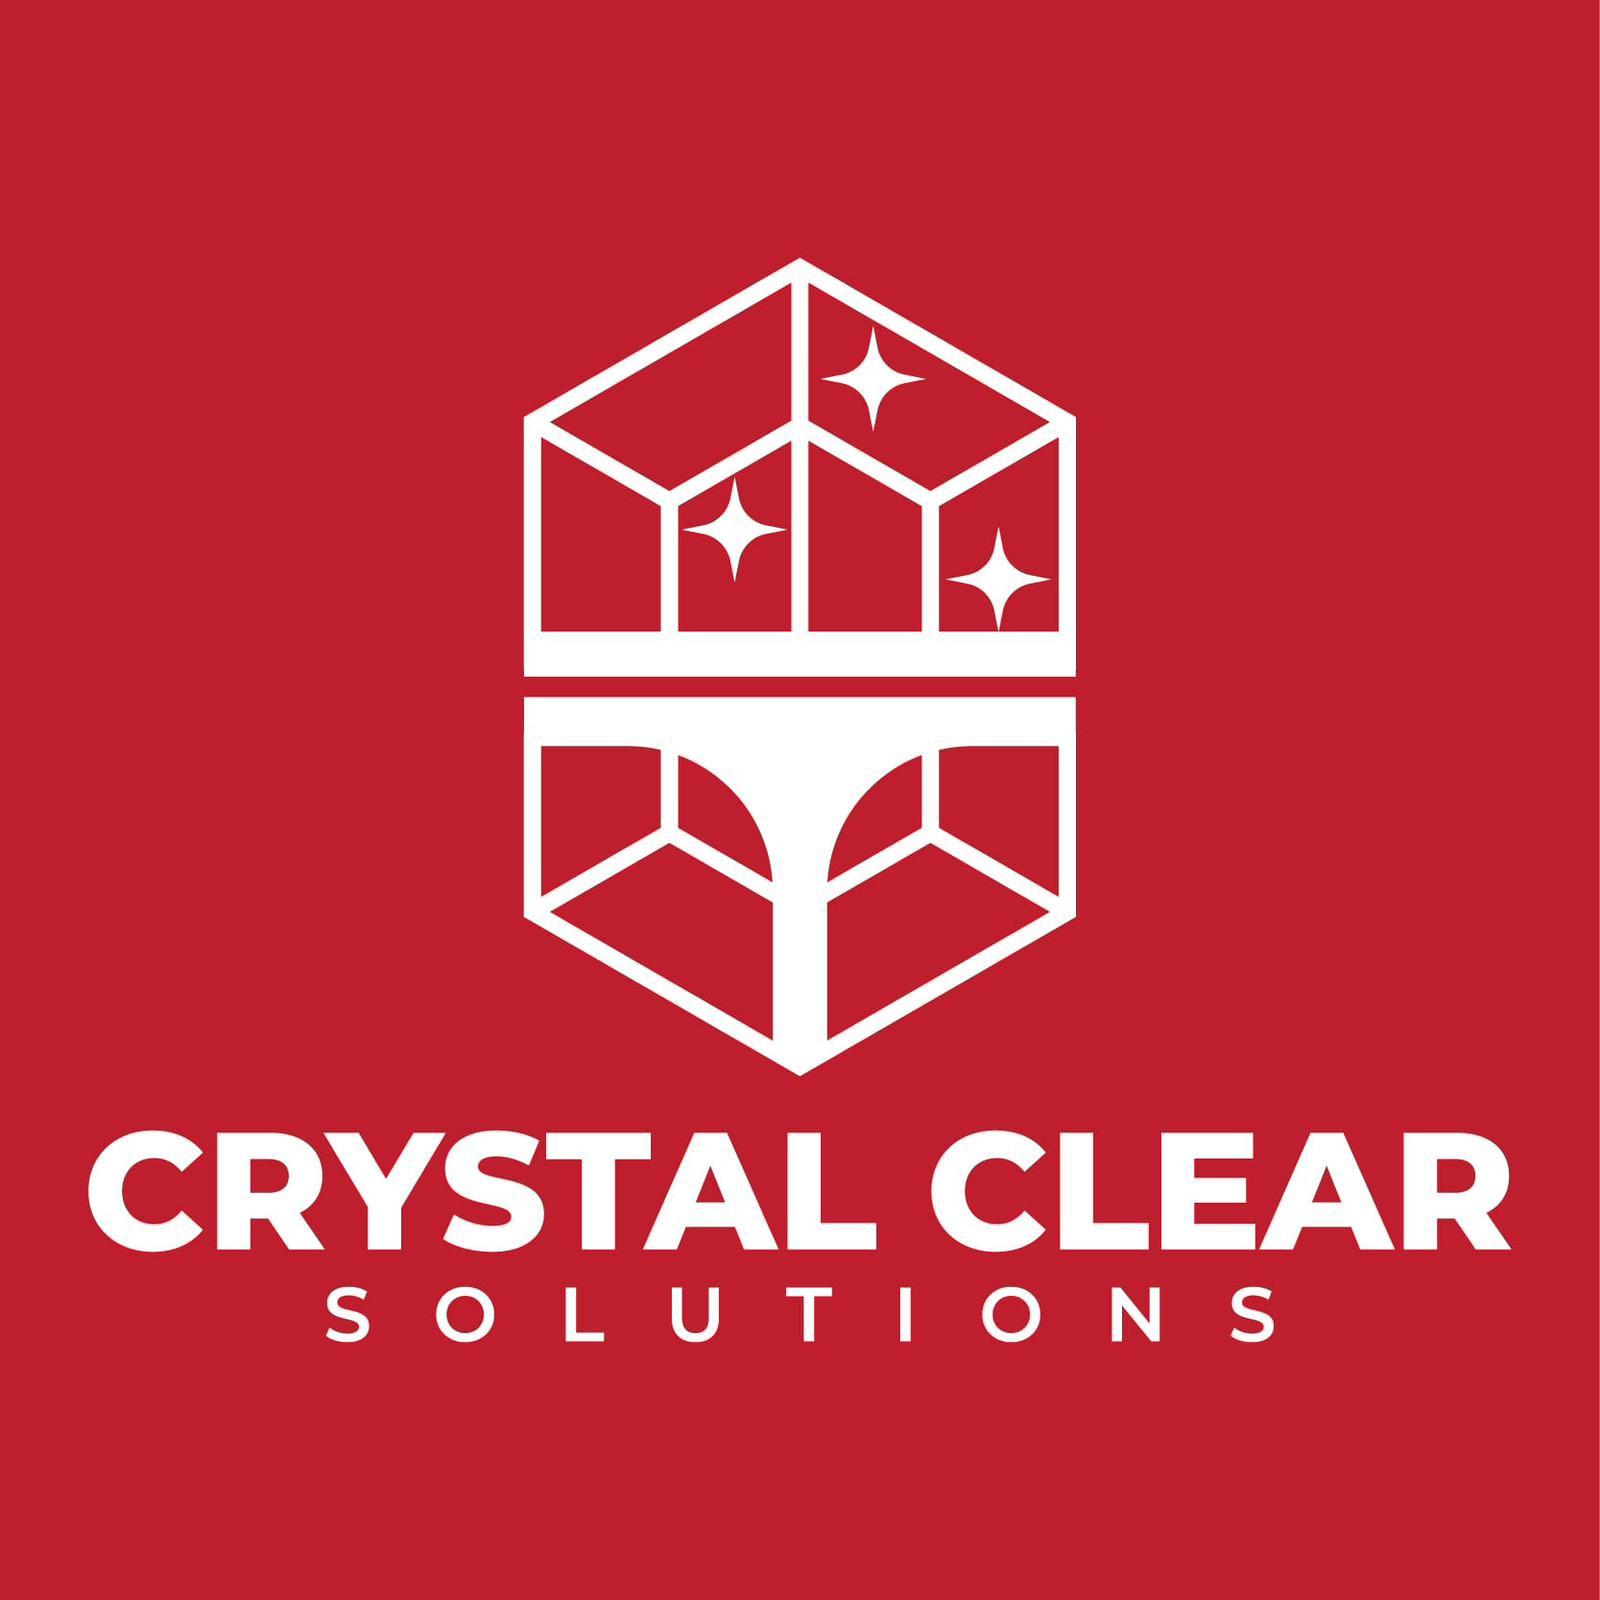 Crystal clear solutionss - Columbus, OH 43240 - (347)805-8362 | ShowMeLocal.com